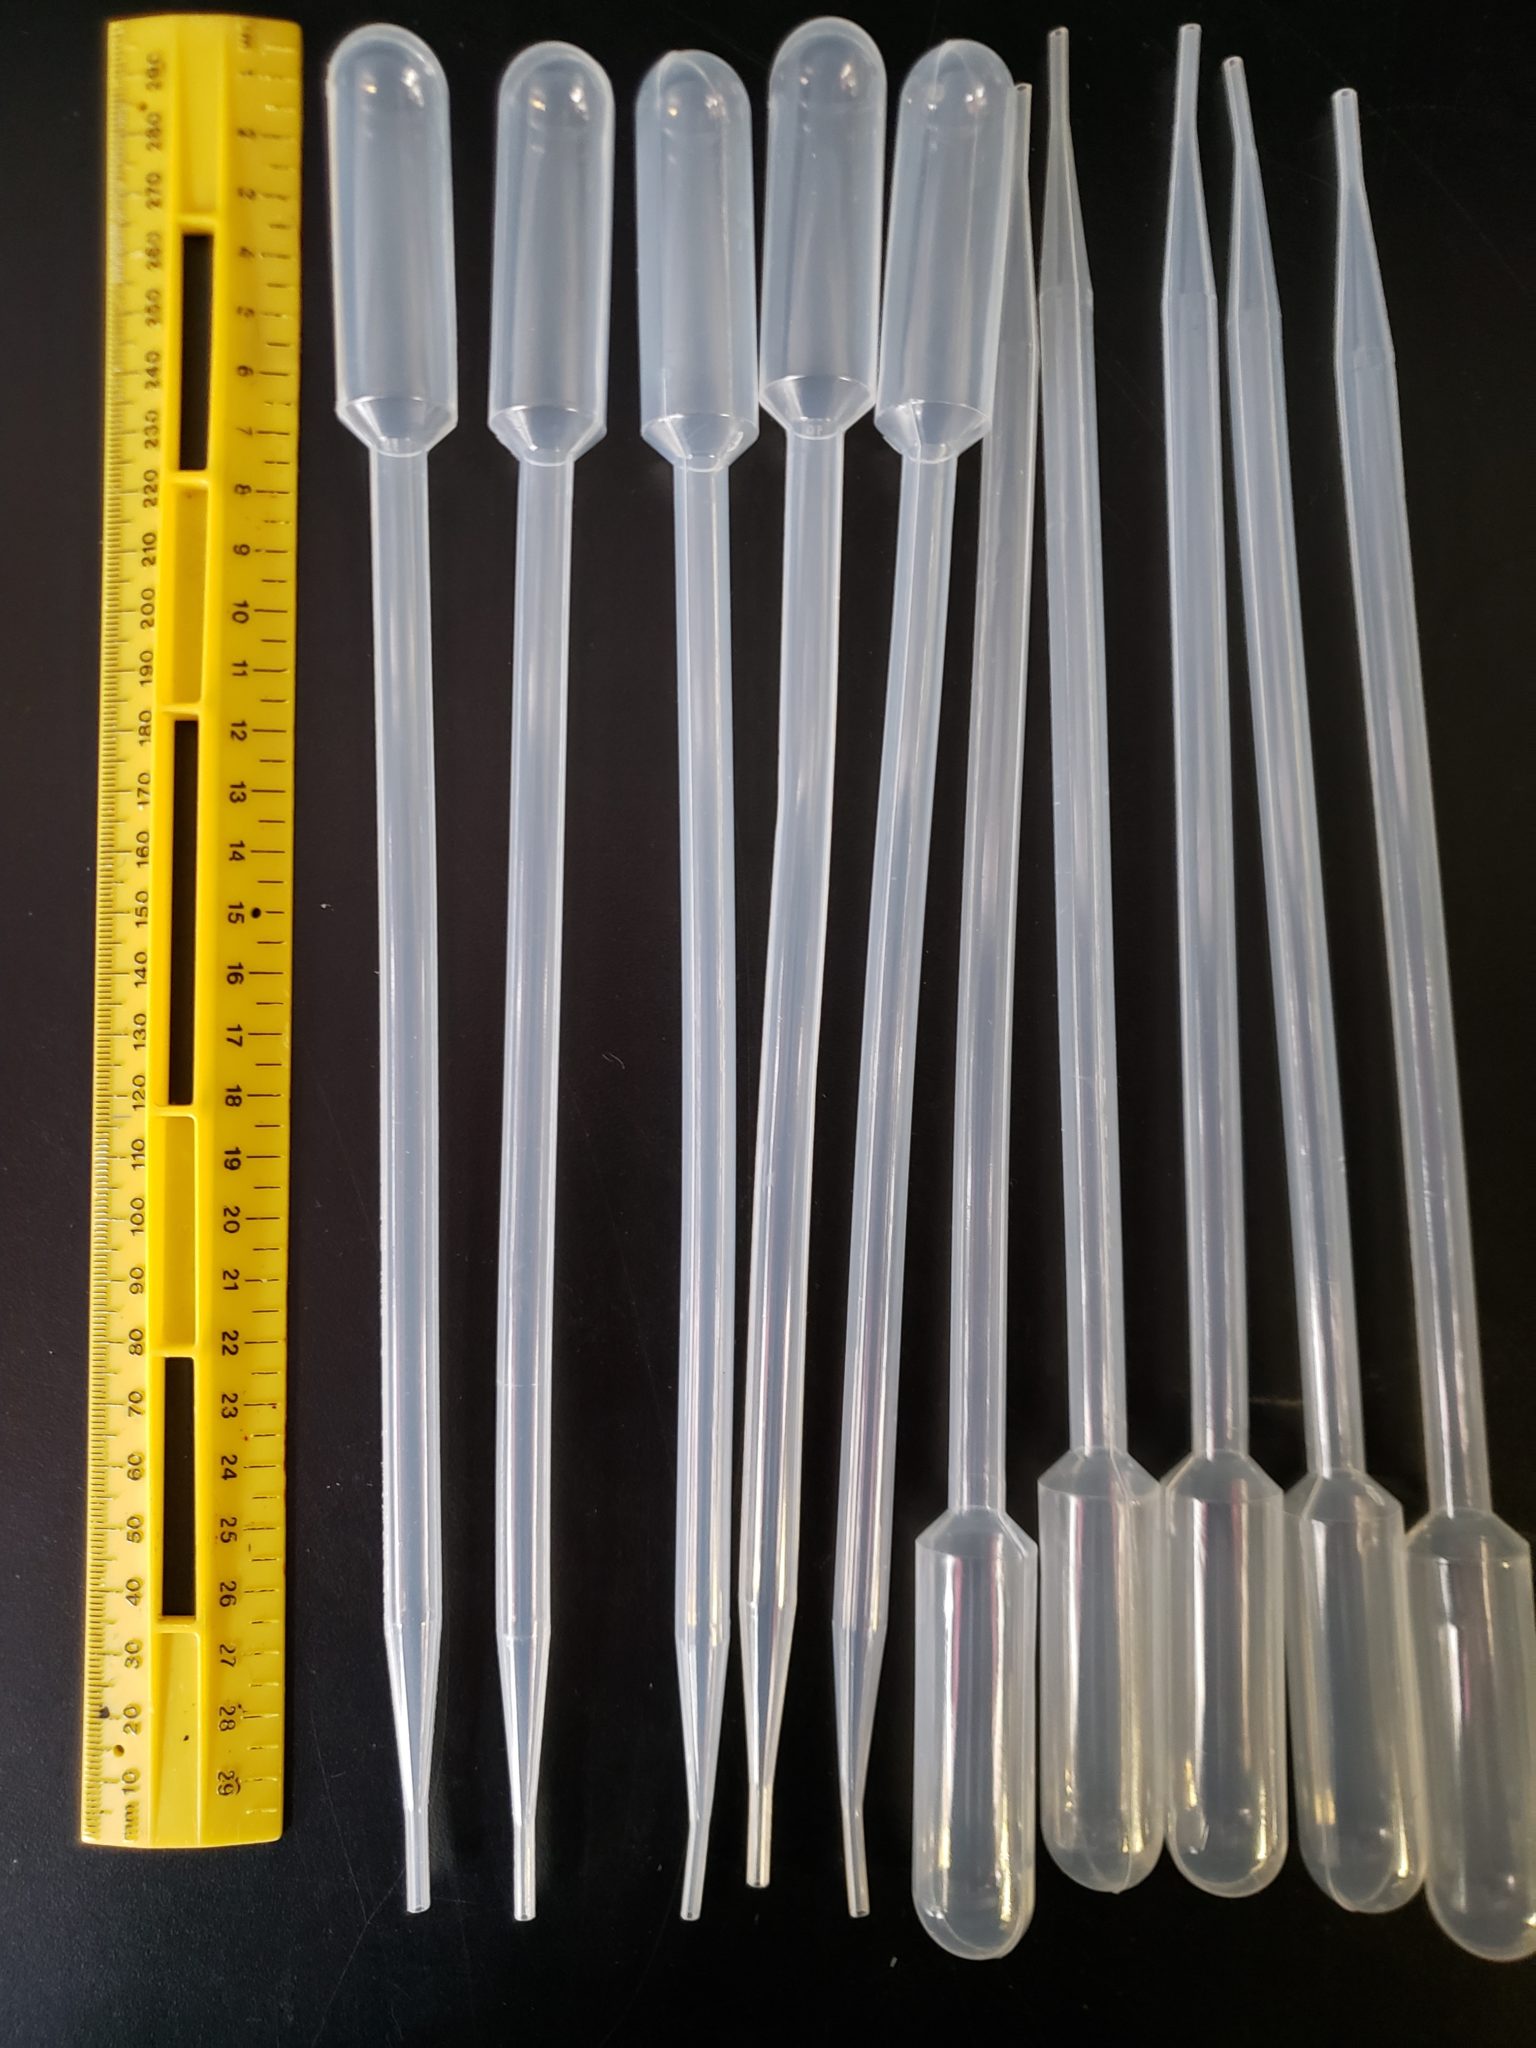 download the new Pipette 23.6.13